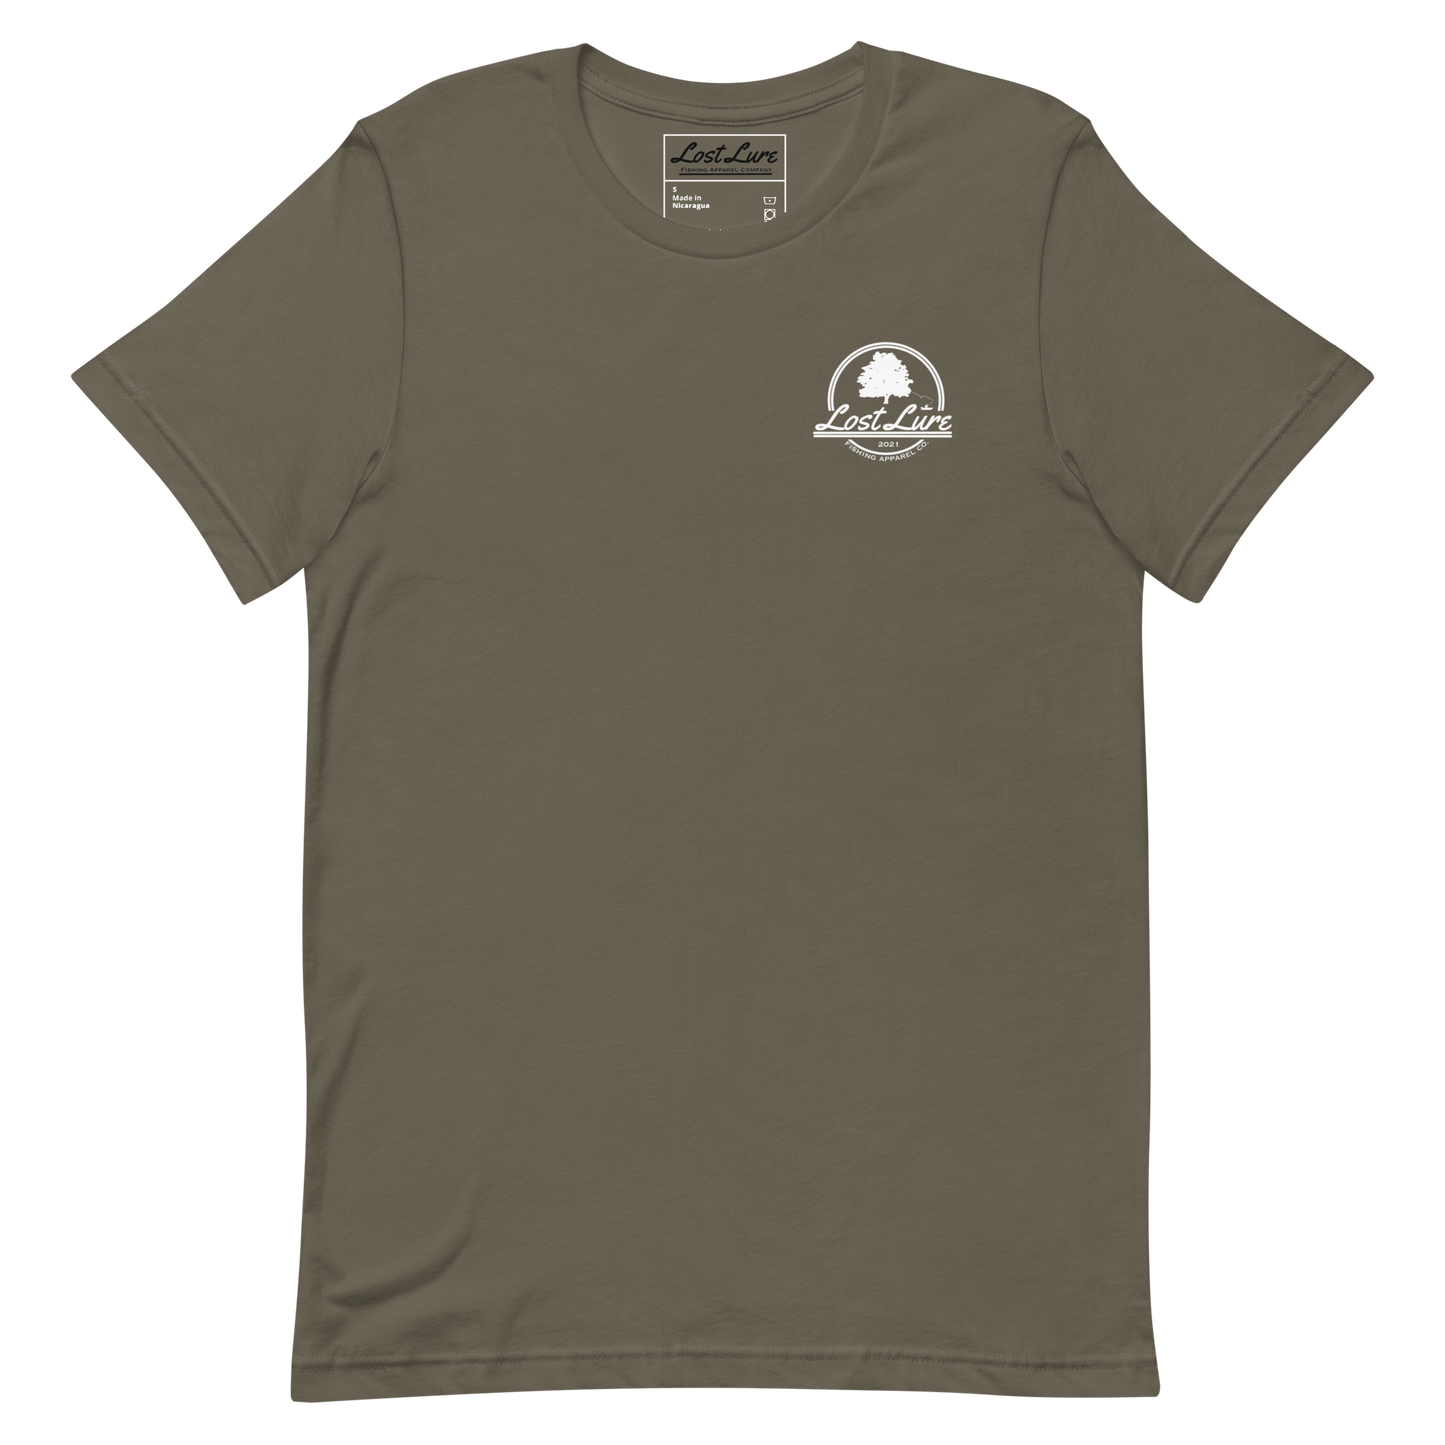 Cutthroat Trout fishing shirt. It’s an American traditional style design with a cutthroat trout and a dagger. The shirt reads Cutthroat trout, est. 2021, lost lure fishing apparel company. The front of the shirt has the lost lure logo. Army green, front side